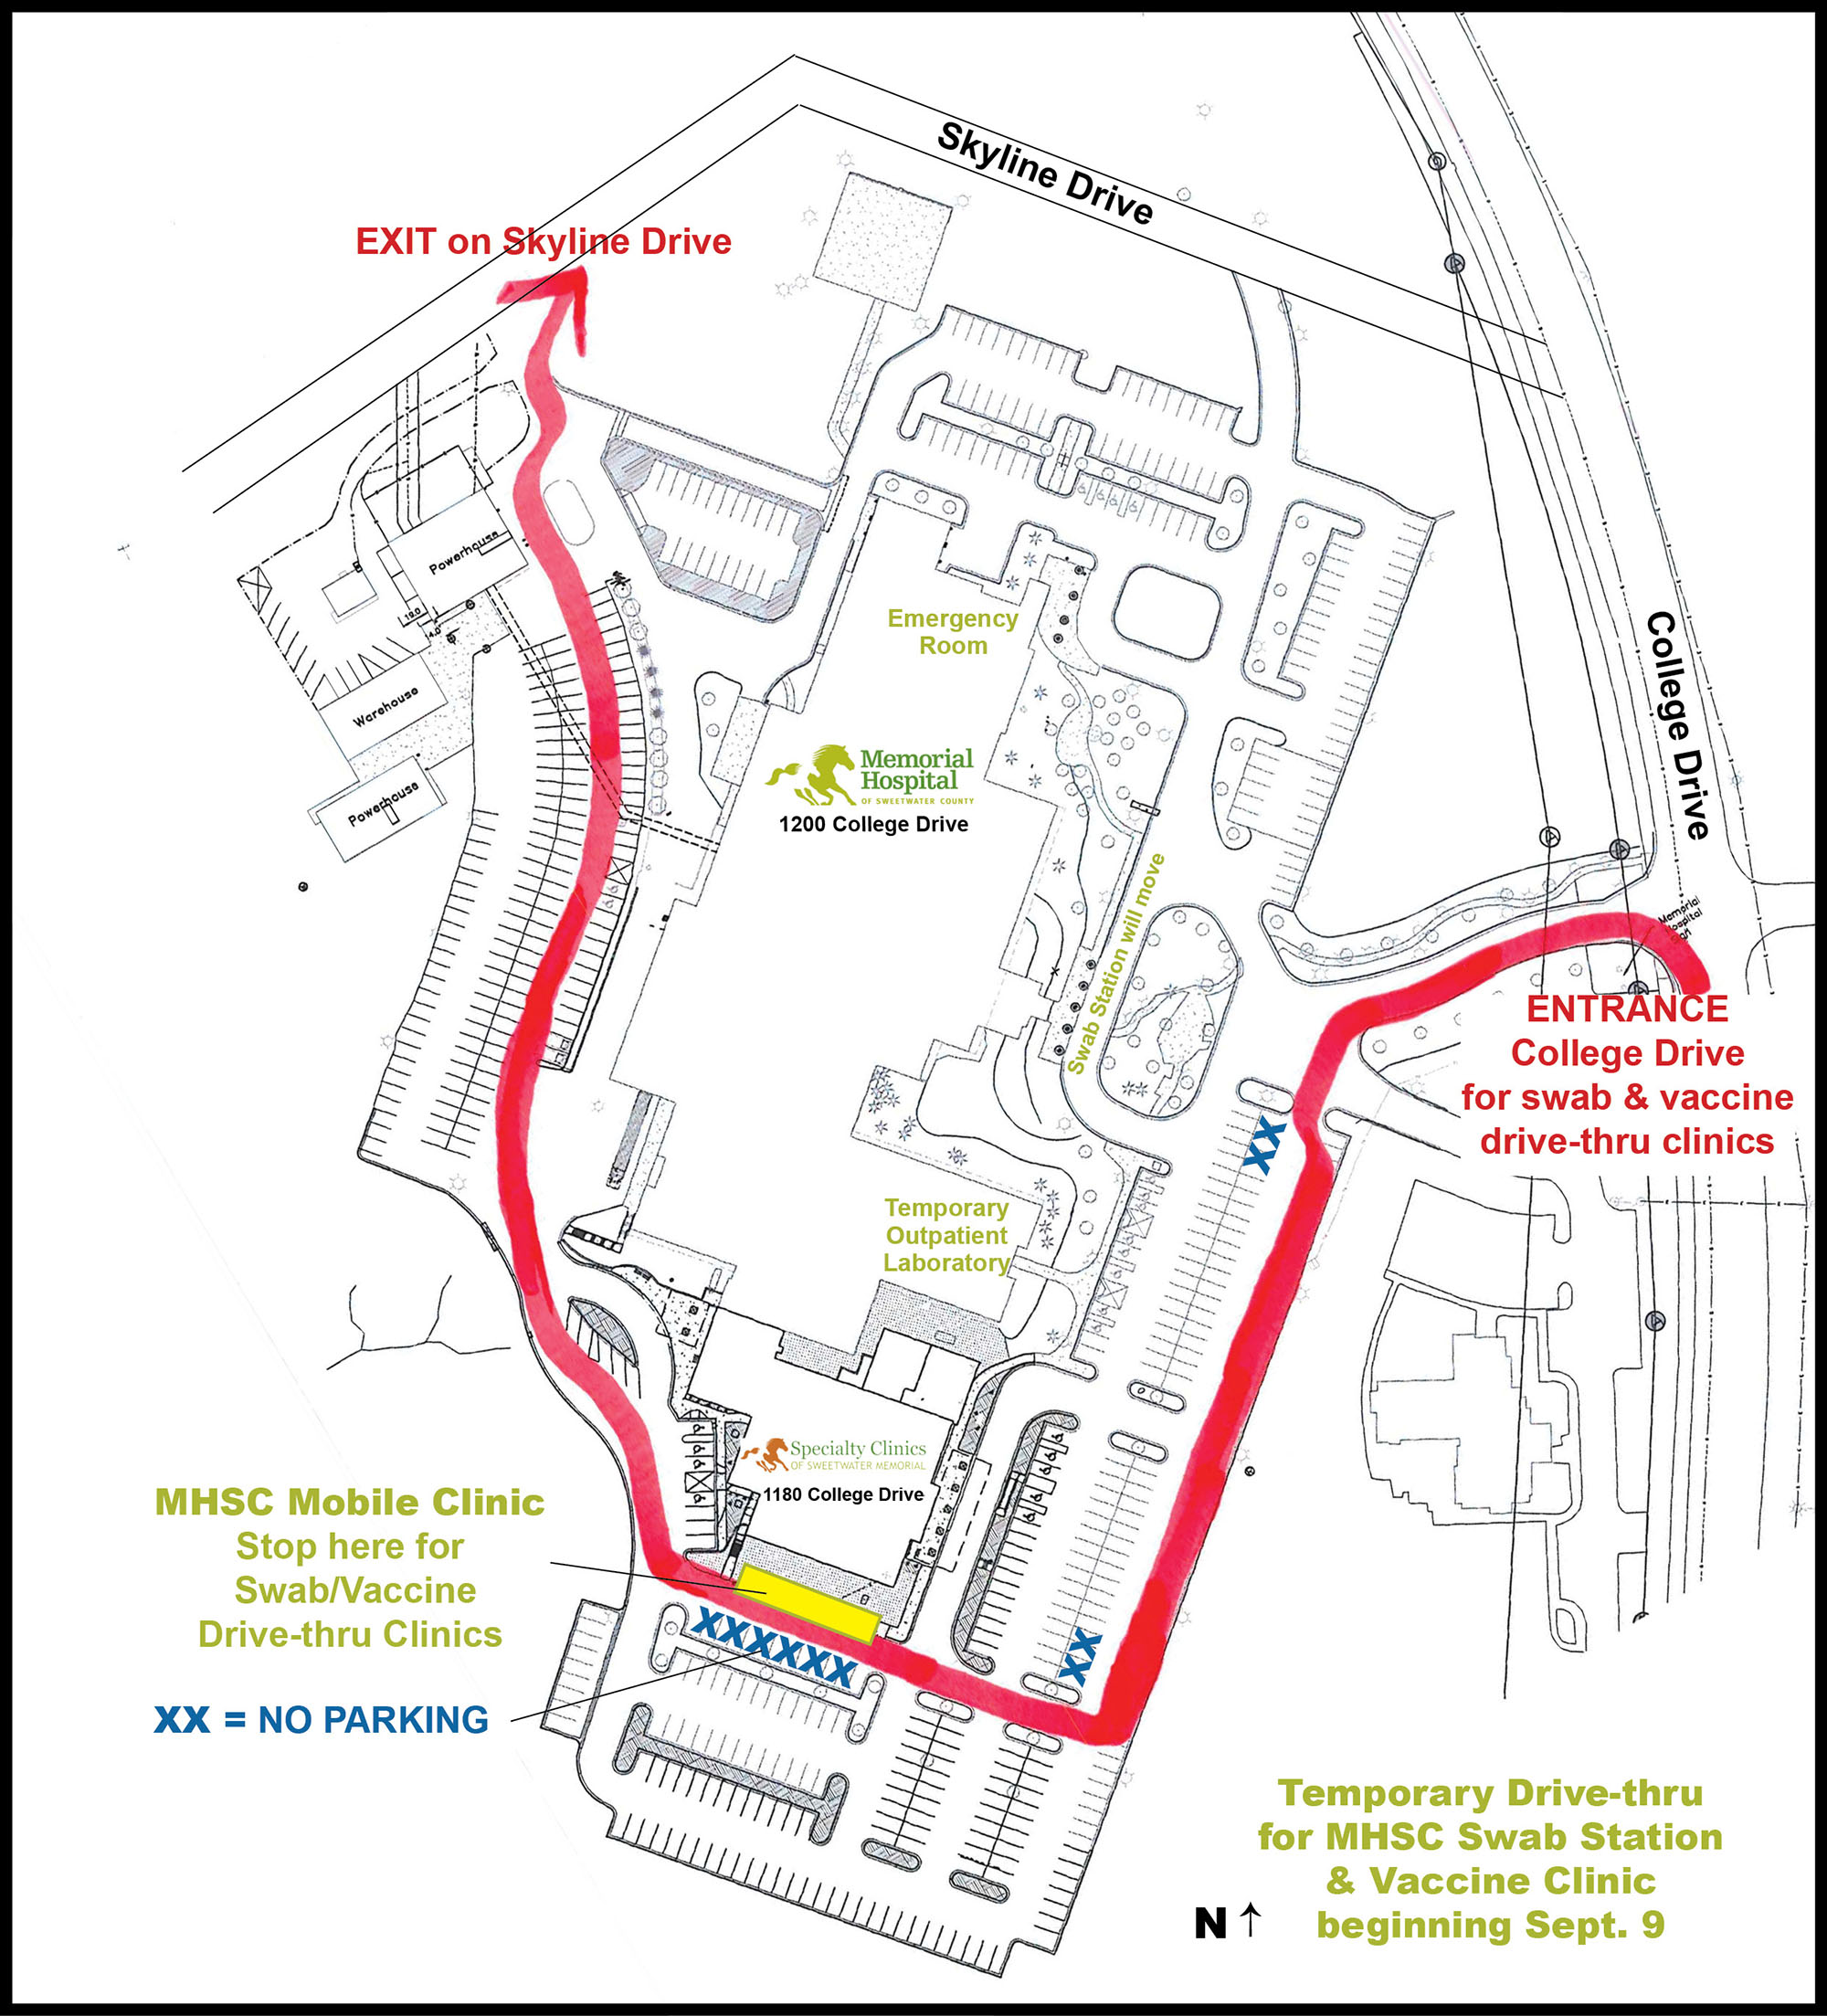 Map of traffic flow for temporary drive-thru.